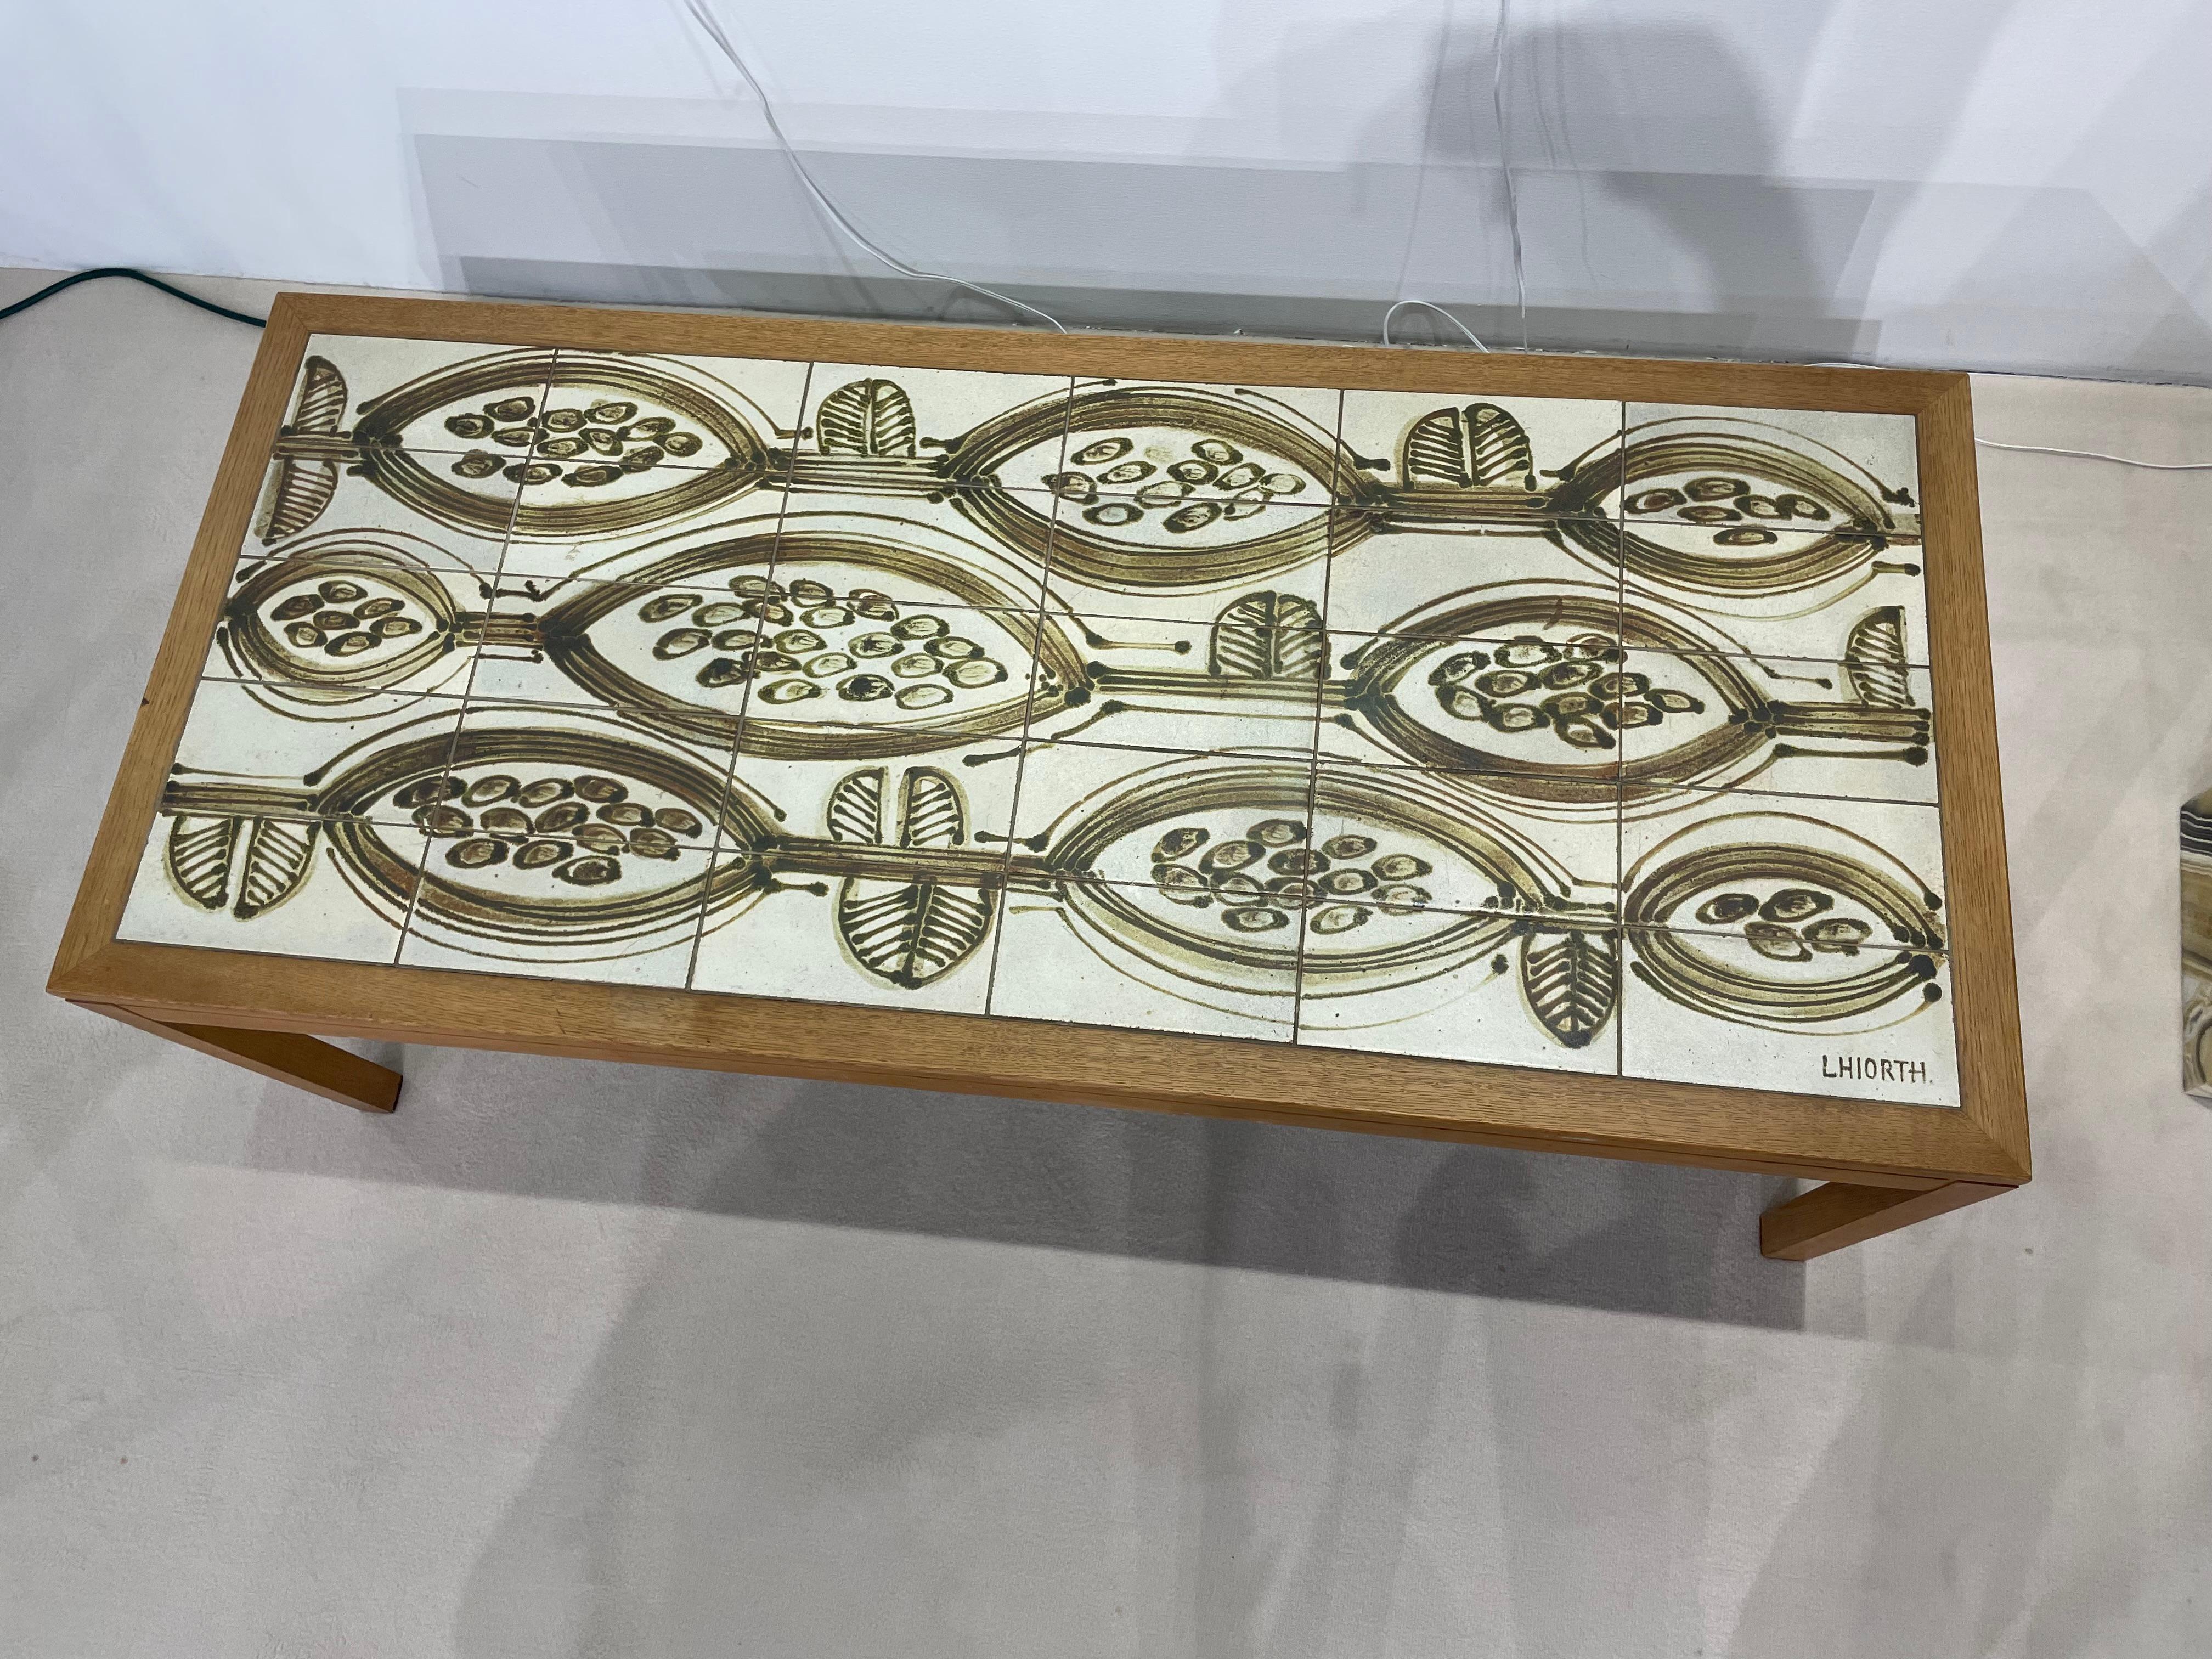 Danish Mid-Century Modern made from bright wood with inlaid hand-made white and green ceramic tiles from L.Horth circa 1960. Very decorative piece.